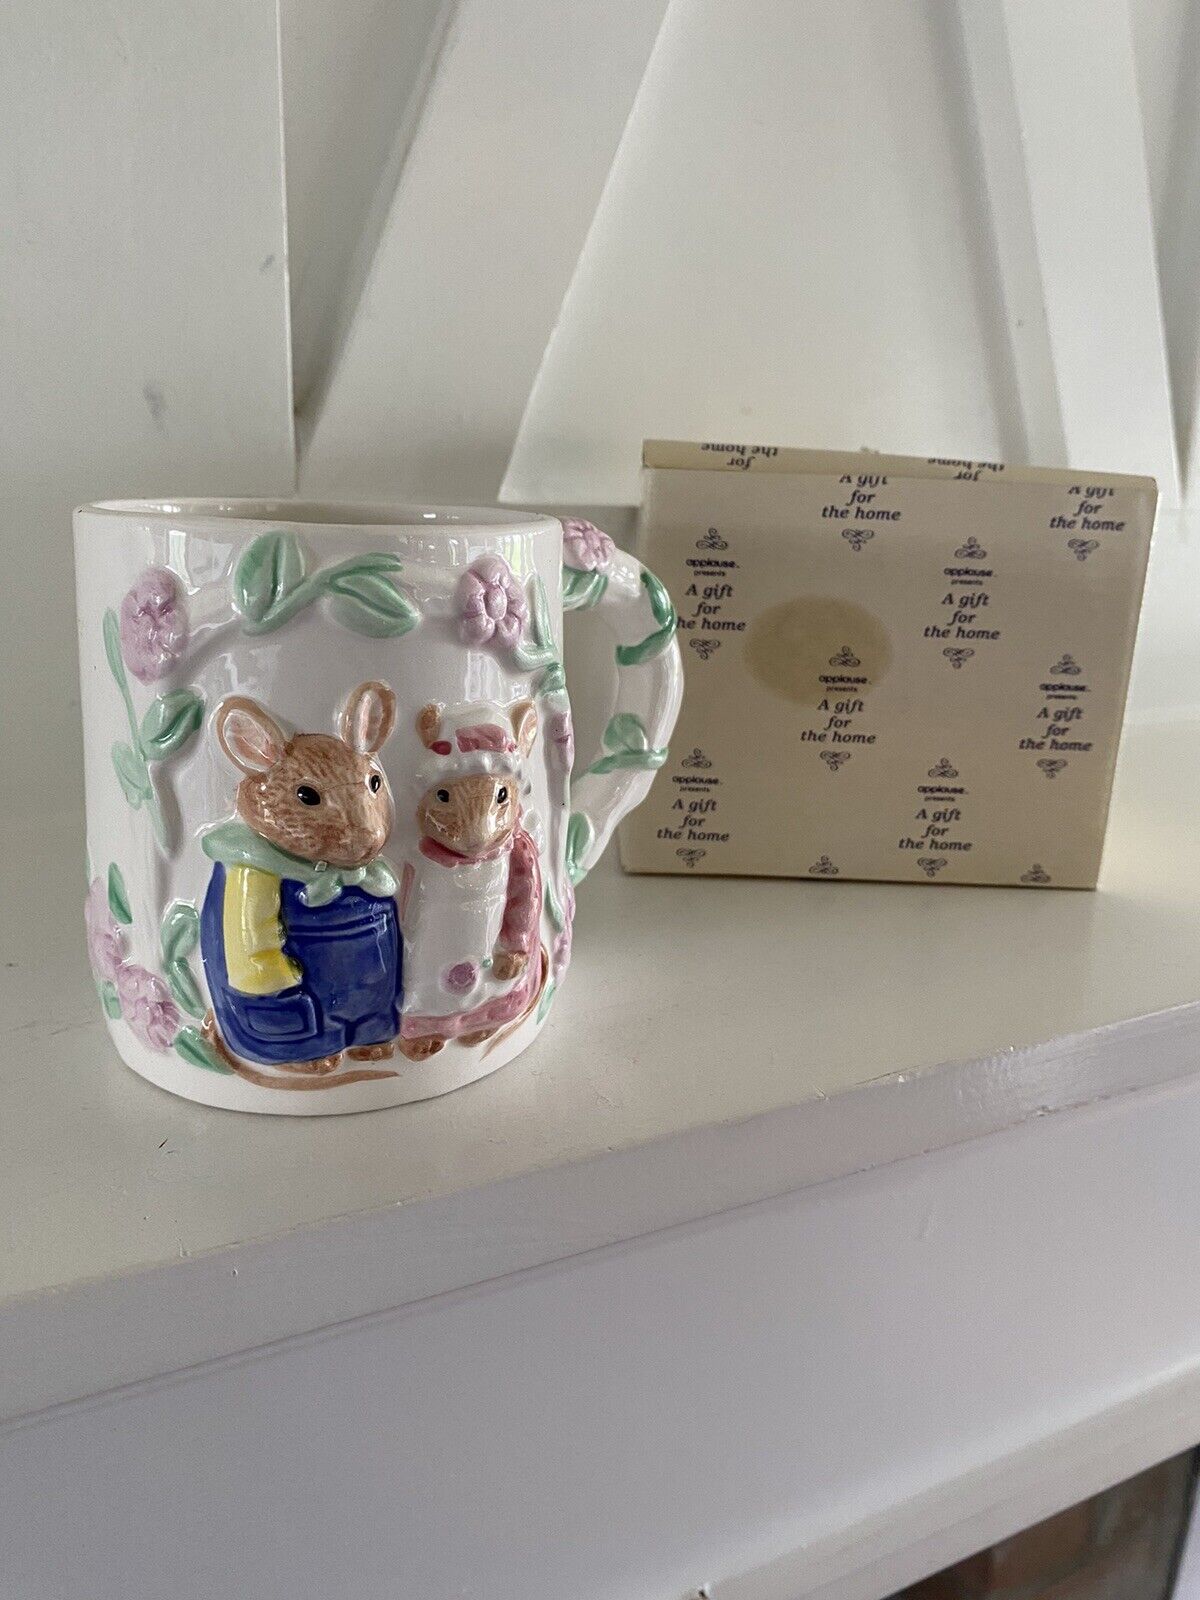 Vintage Applause Presents A Gift For The Home Mug bunnies